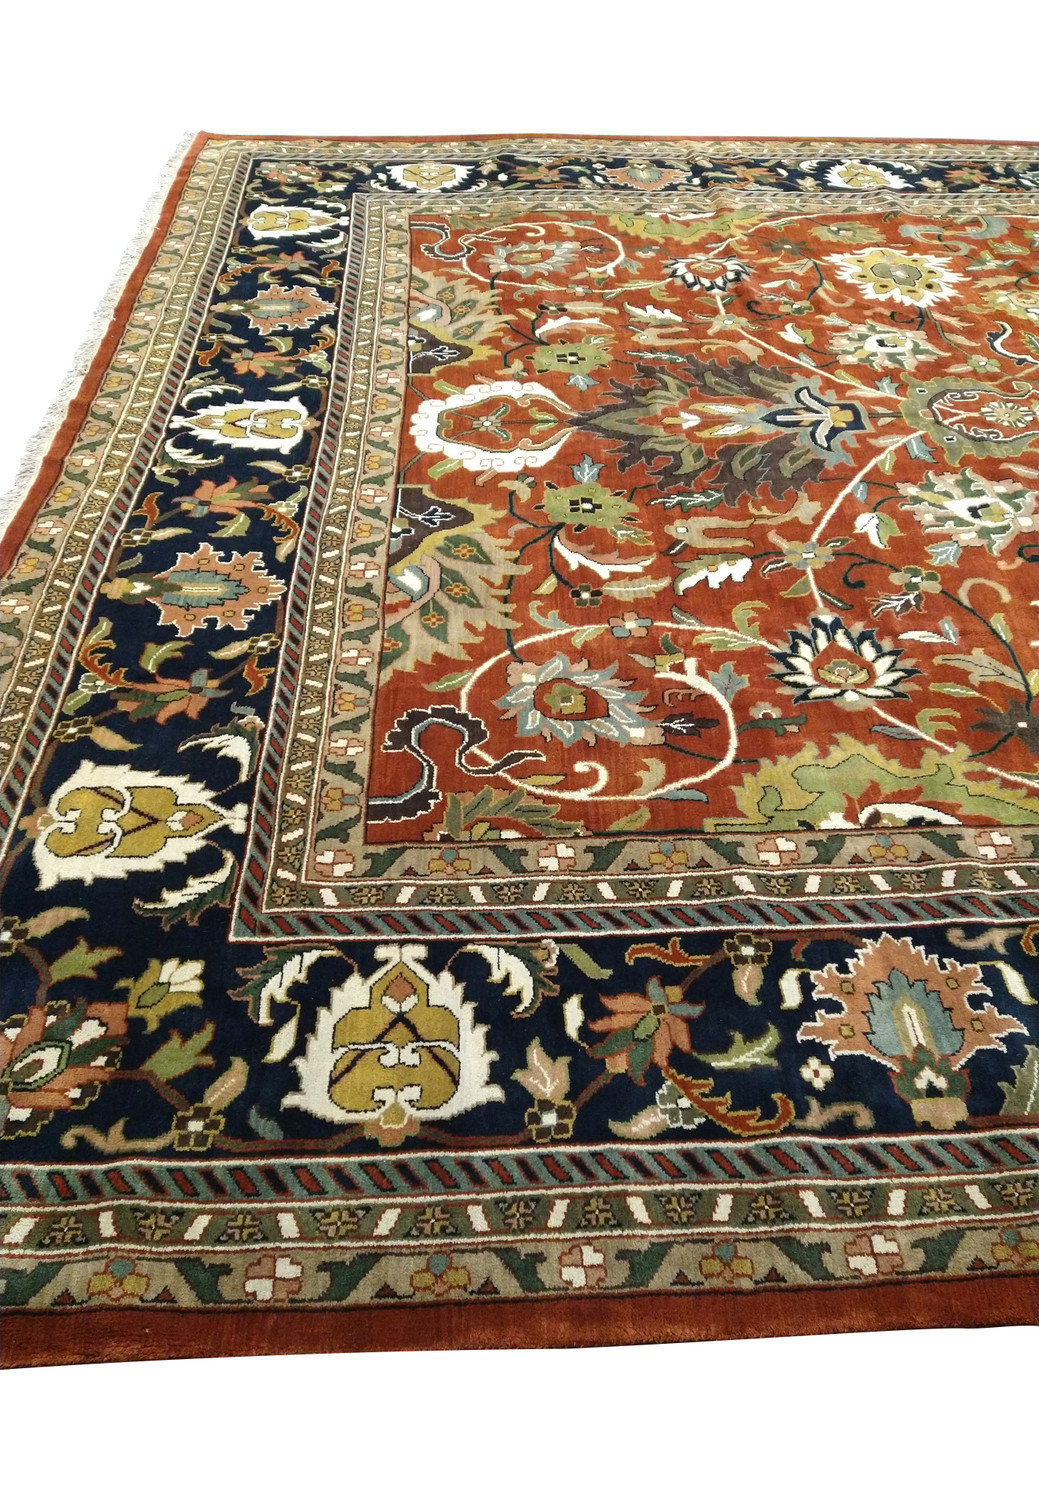 Detailed view of the elaborate border and corner designs of a handwoven Oriental Serapi Palace Rug with navy blue and terracotta hues